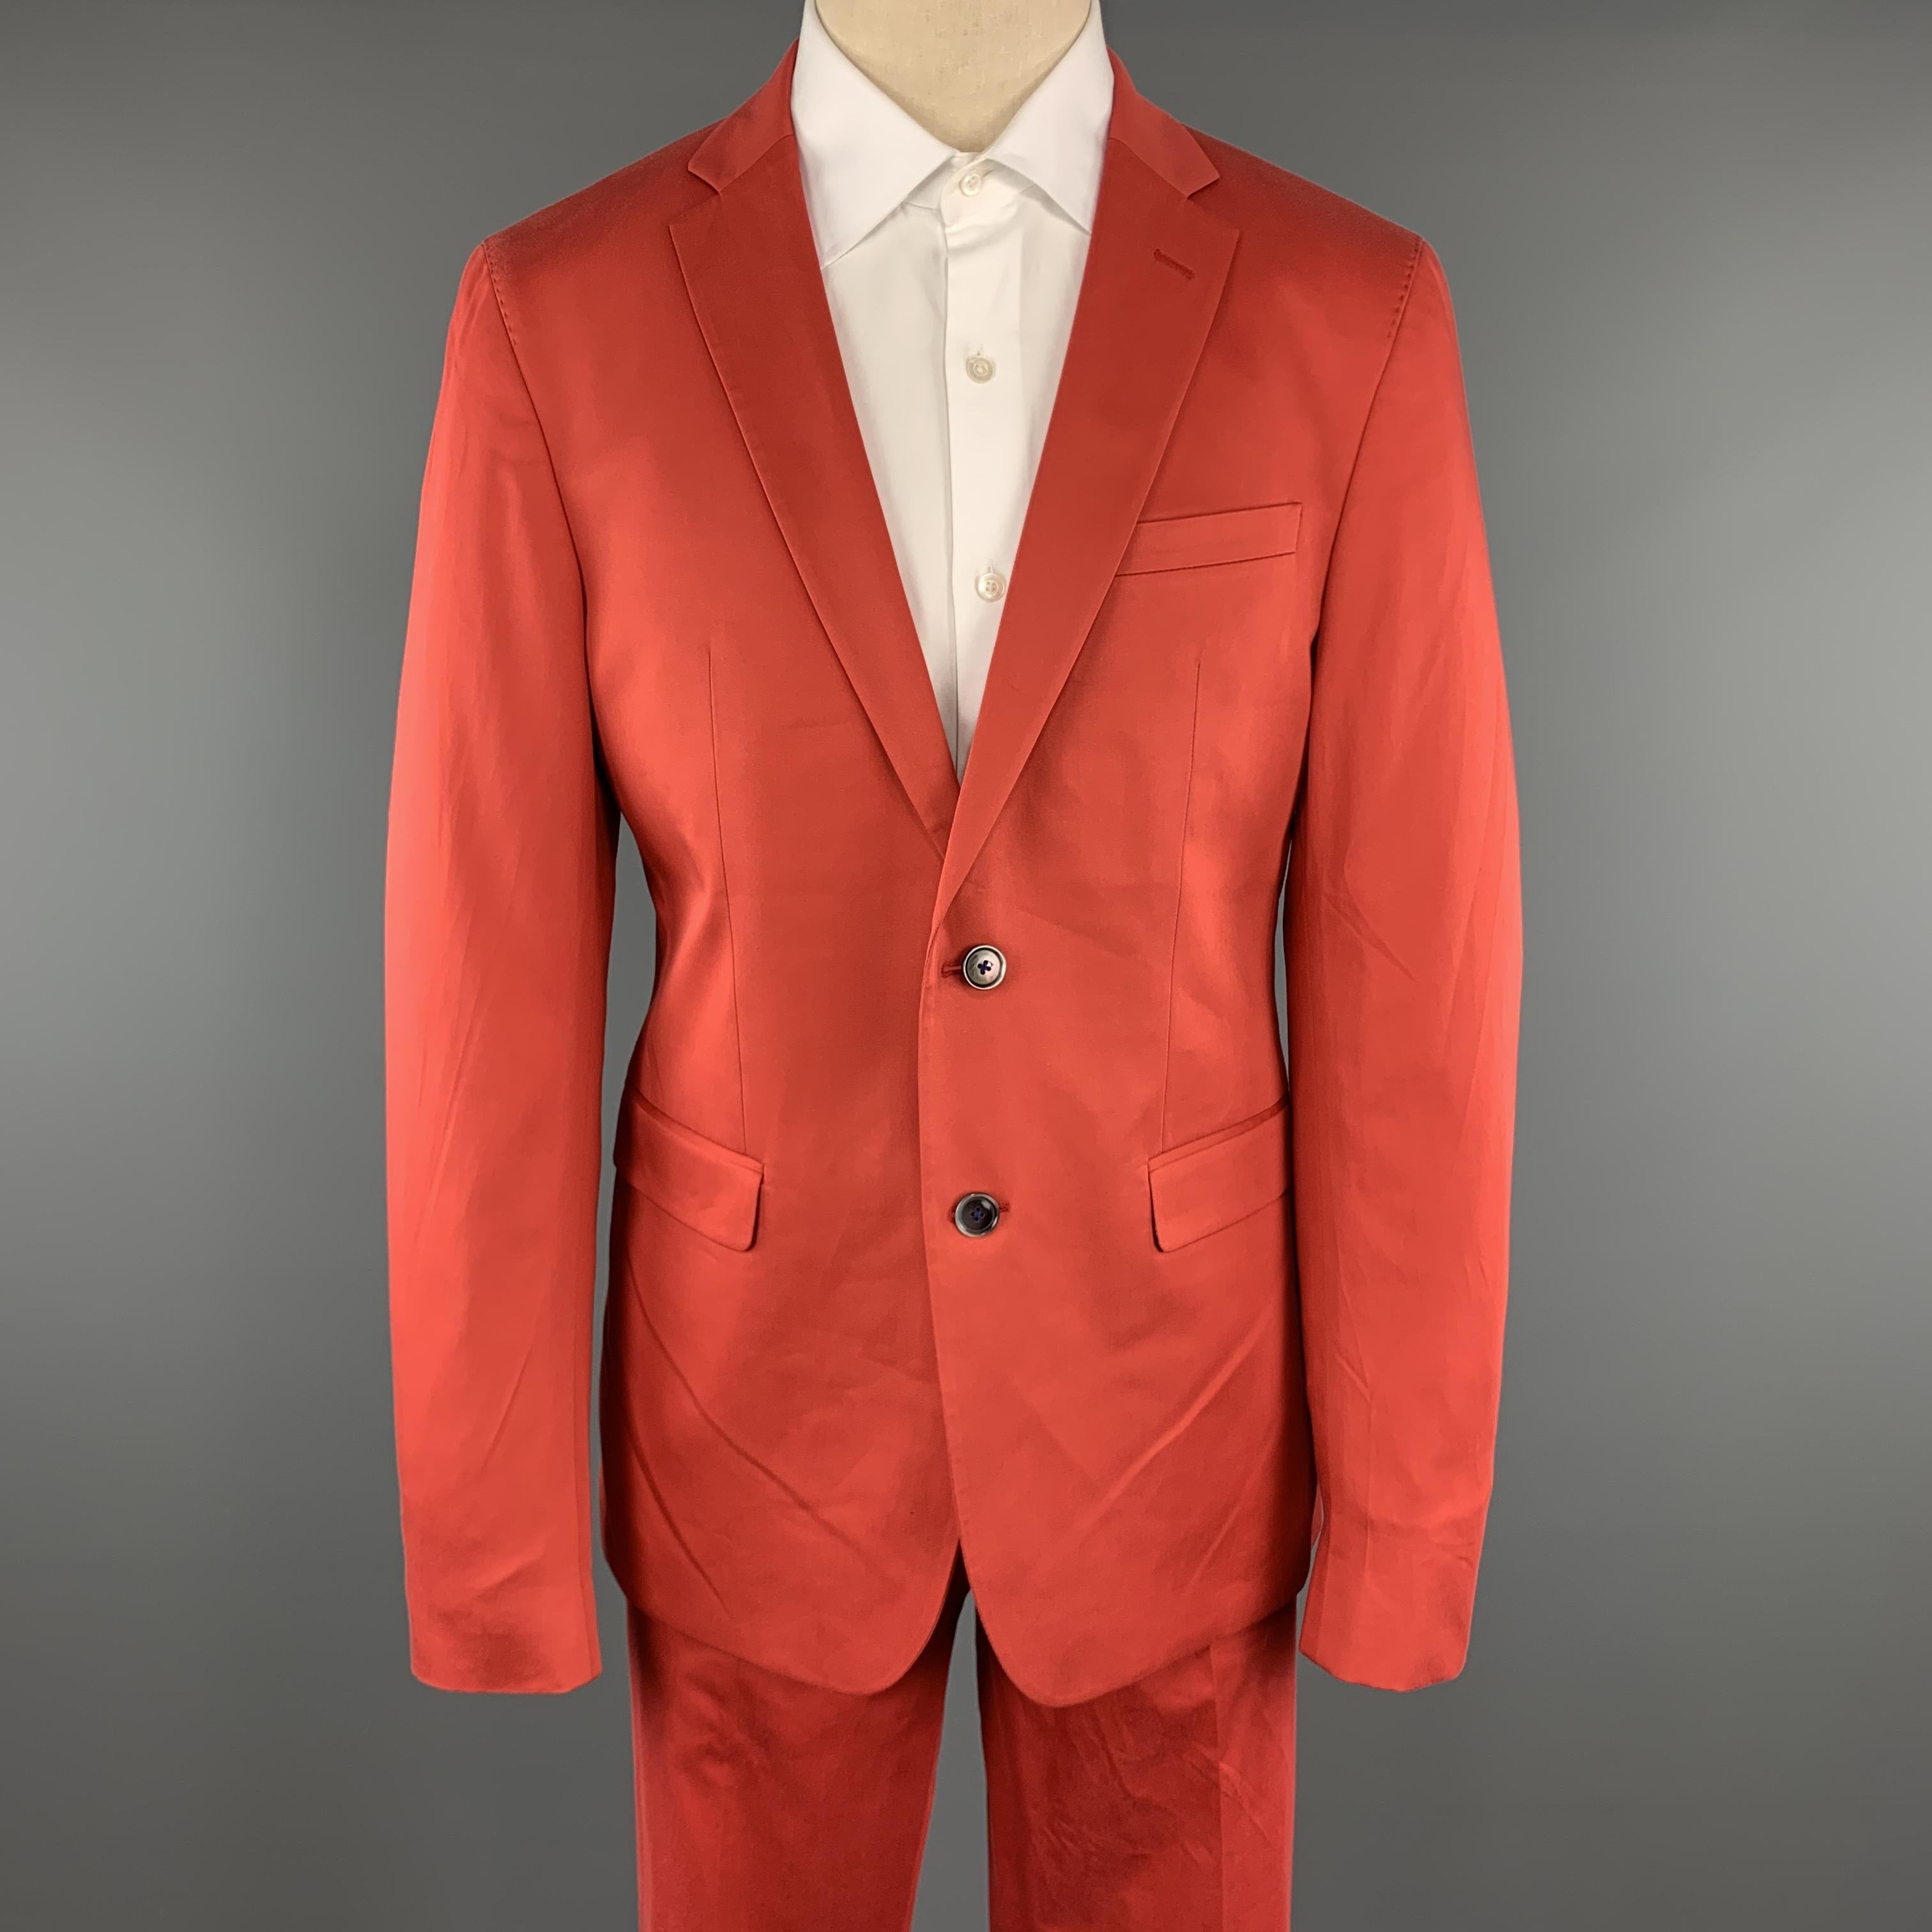 SAND Suit comes in a coral cotton blend and includes a single breasted, two button sport coat with a notch lapel lapel and matching front trousers. 

Excellent Pre-Owned Condition.
Marked: 54

Measurements:

-Jacket
Shoulder: 17.5 in. 
Chest: 44 in.